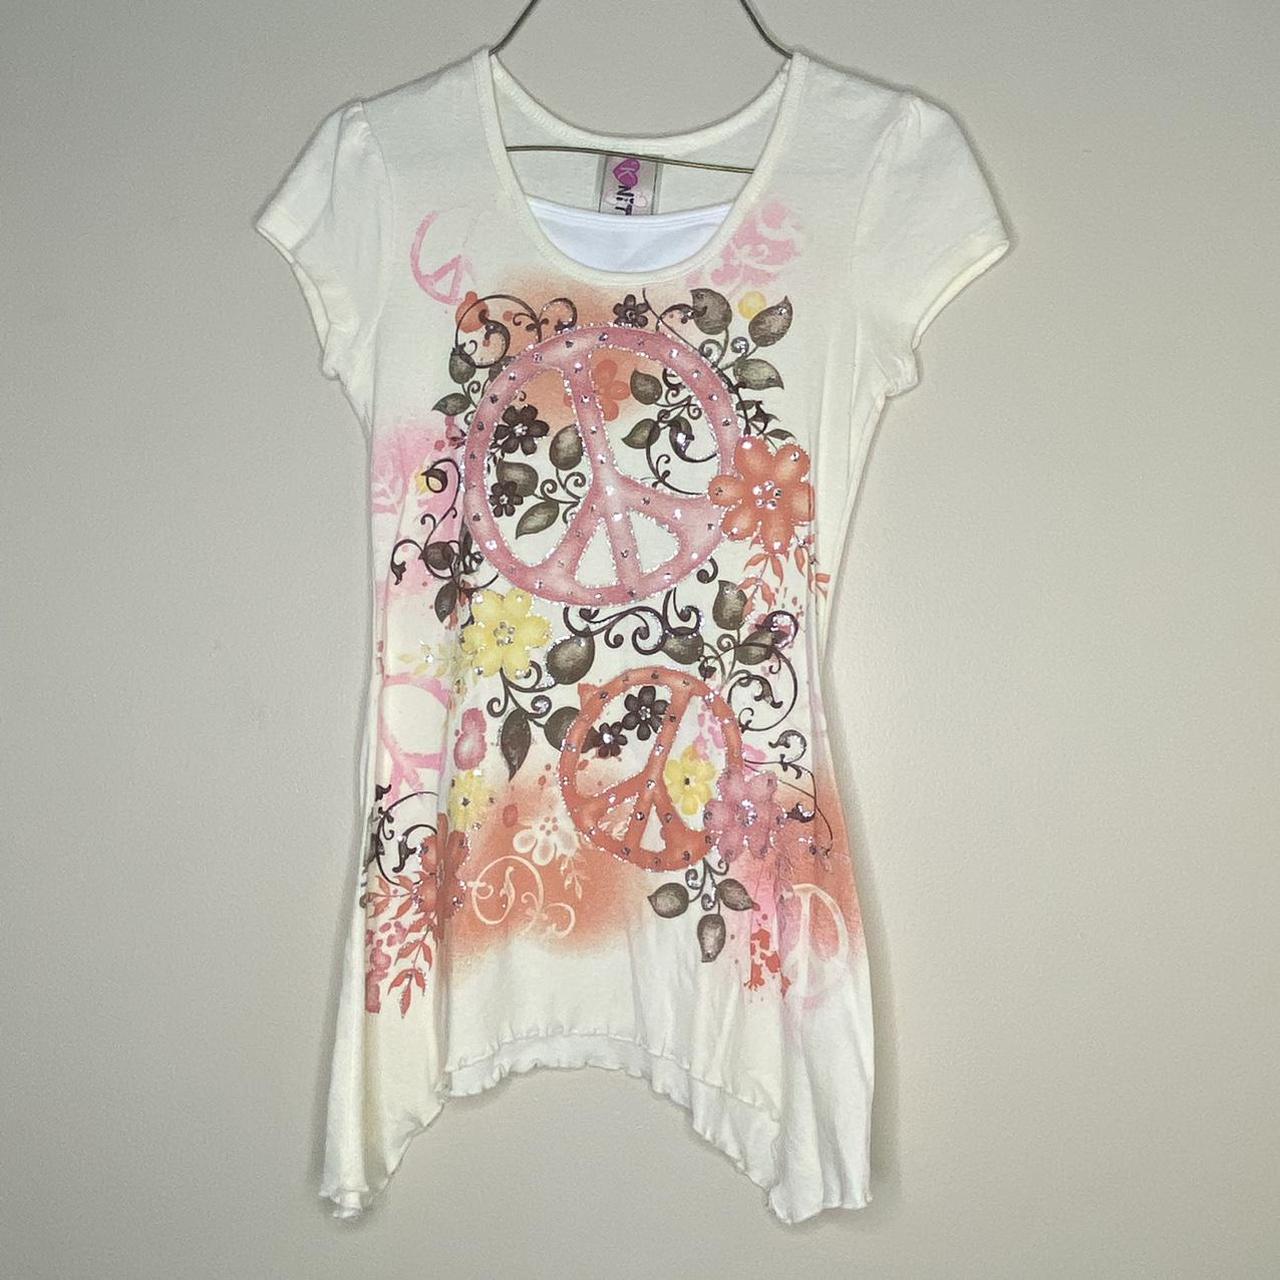 Product Image 1 - Knitworks super cute shirt 

Size